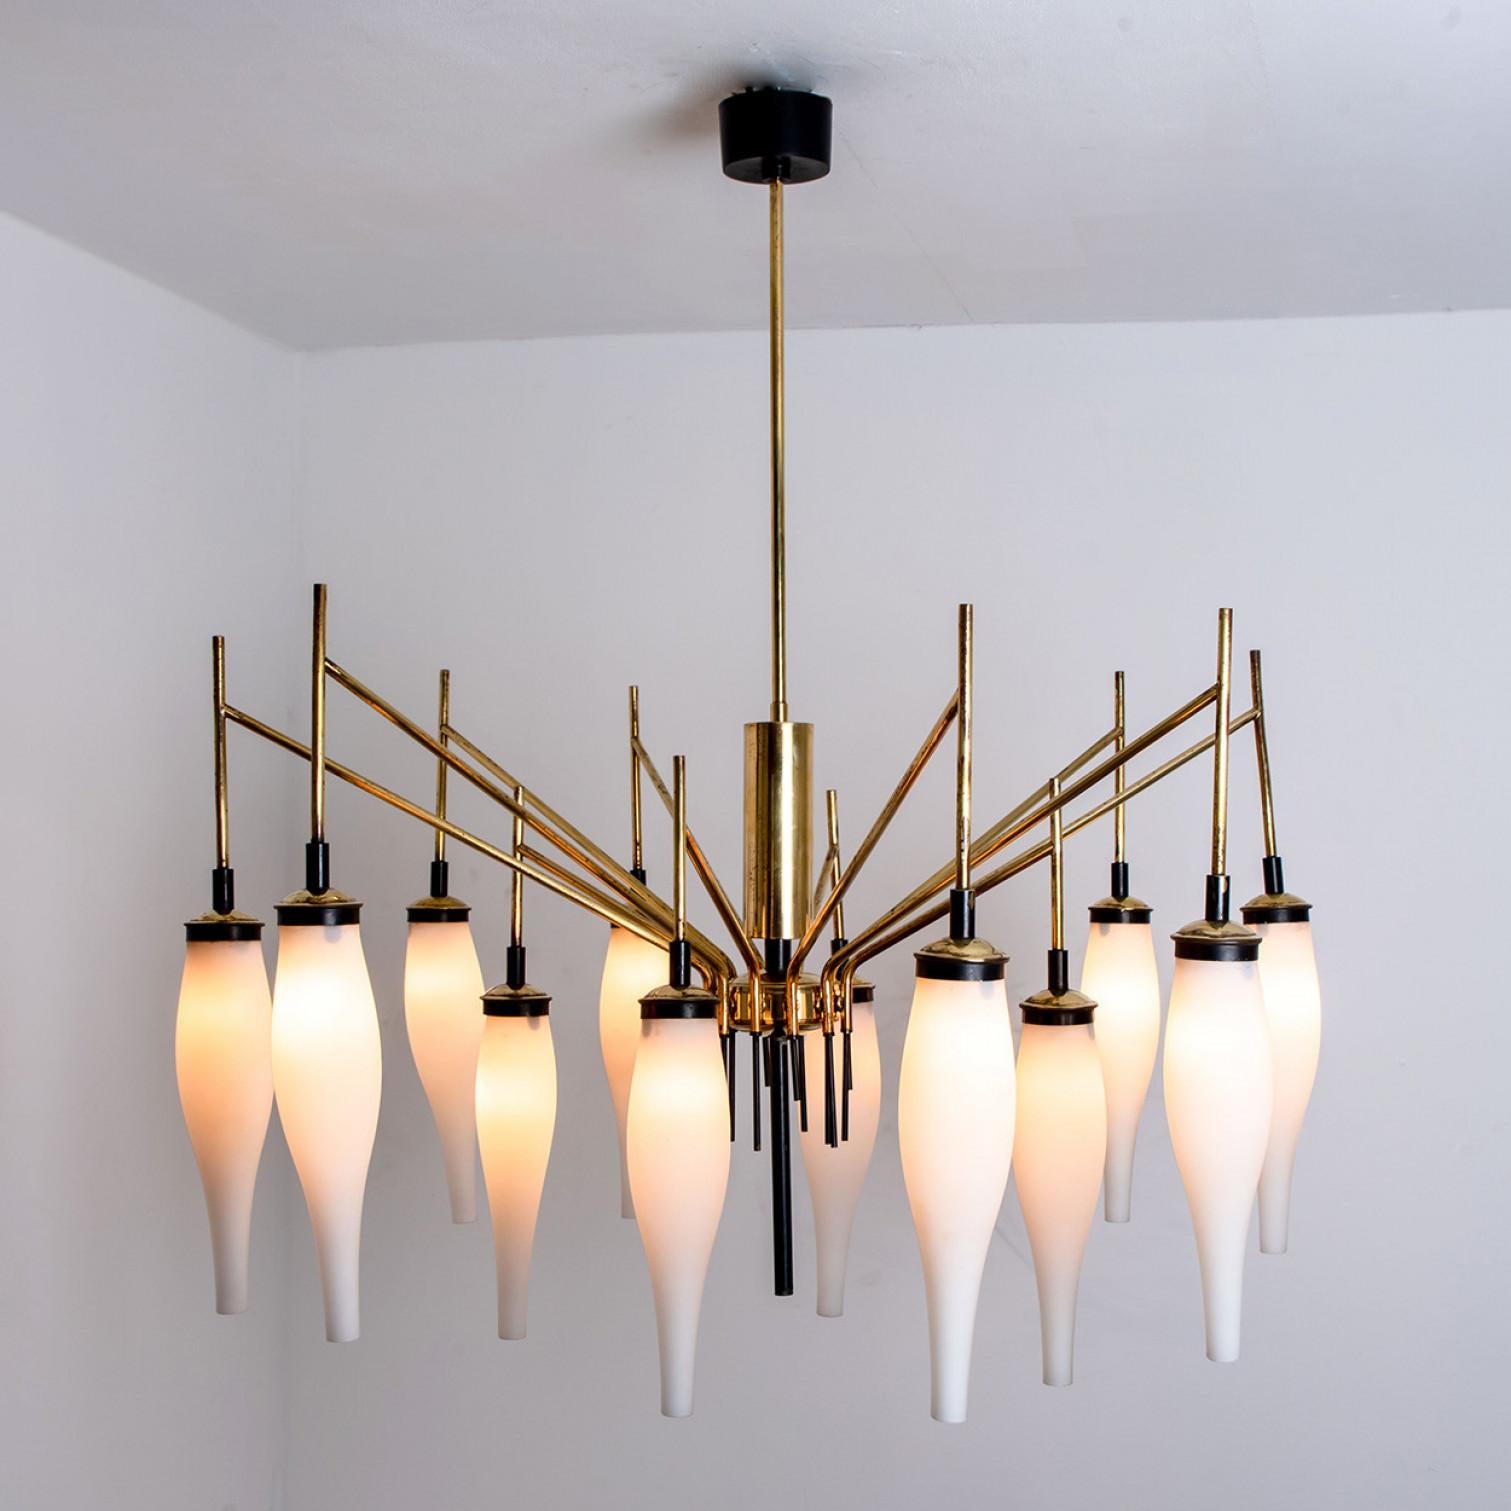 Other Stilnovo Milkglass and Brass Chandelier, Italy, 1960s For Sale